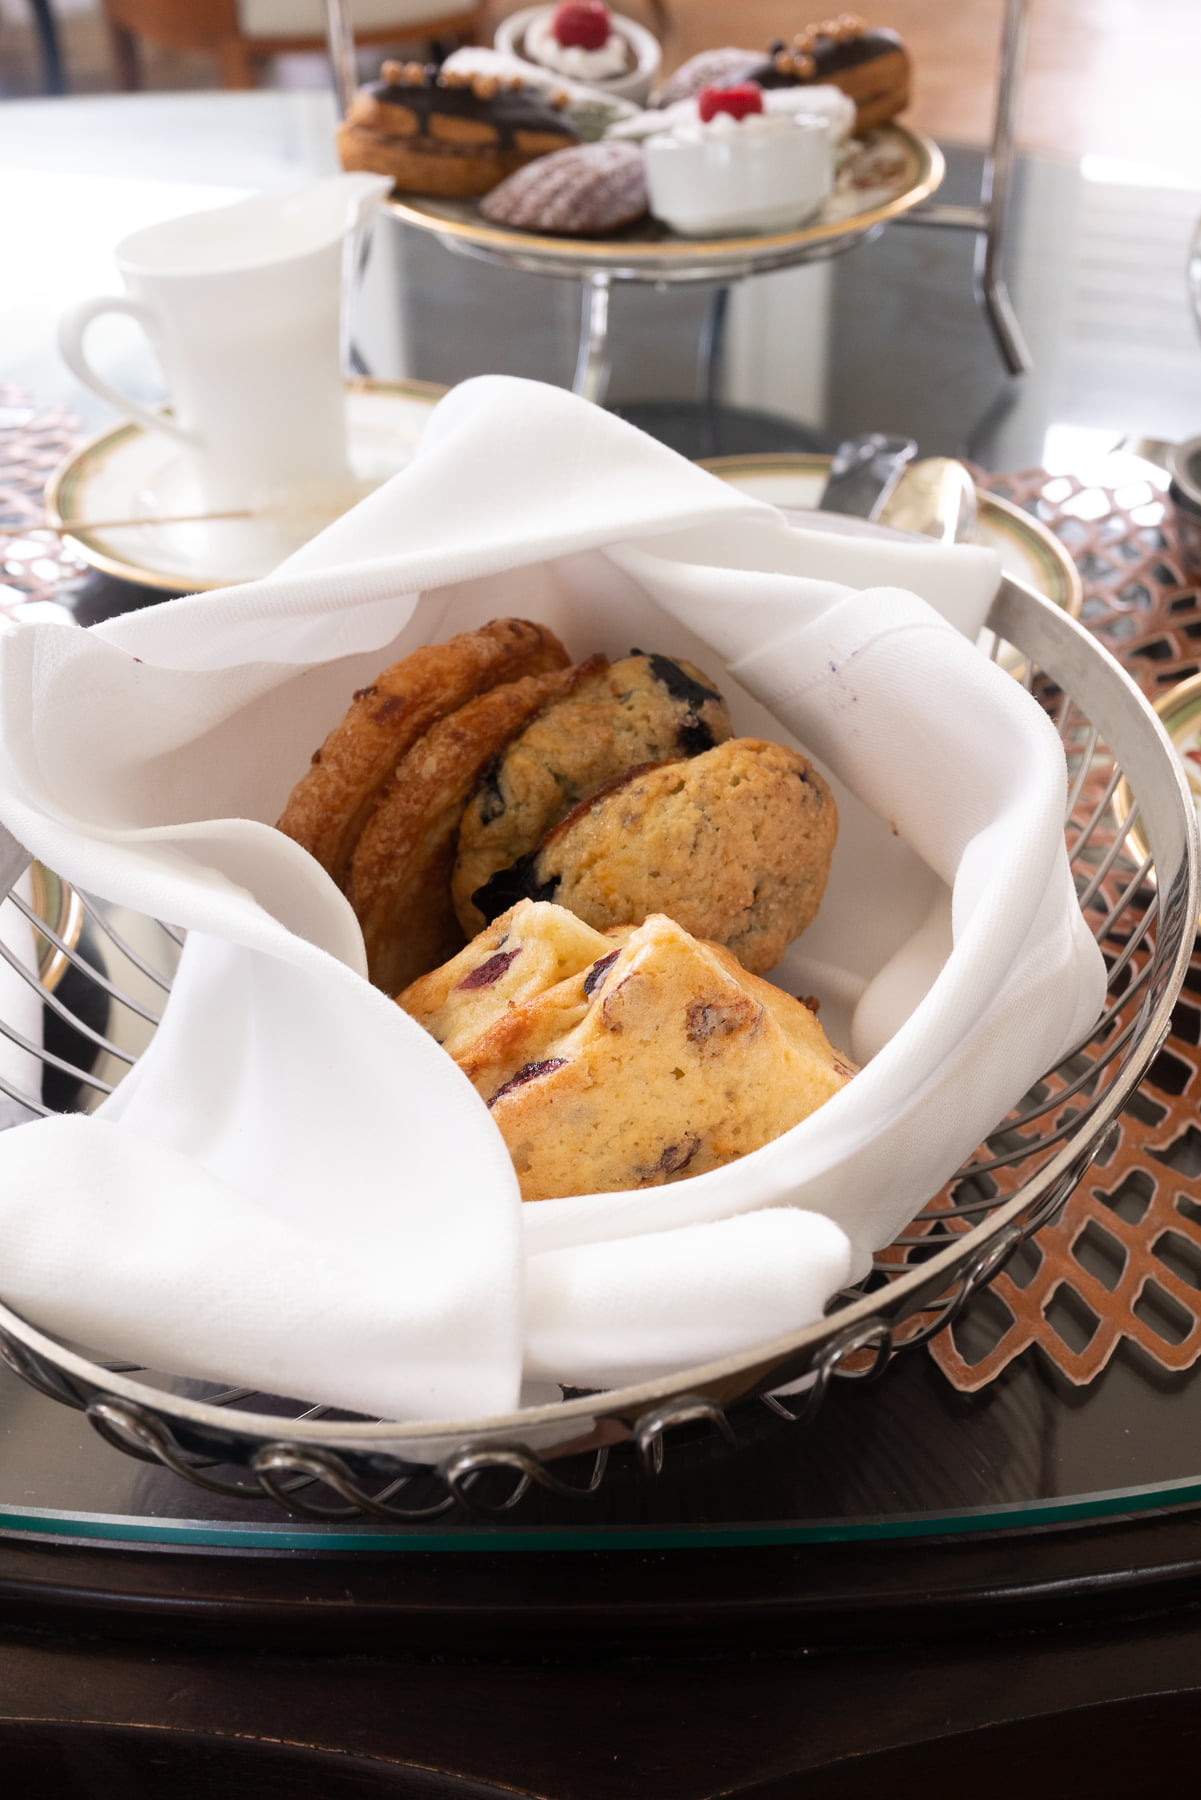 A basket of scones and pastries at Kahala Hotel’s afternoon tea.